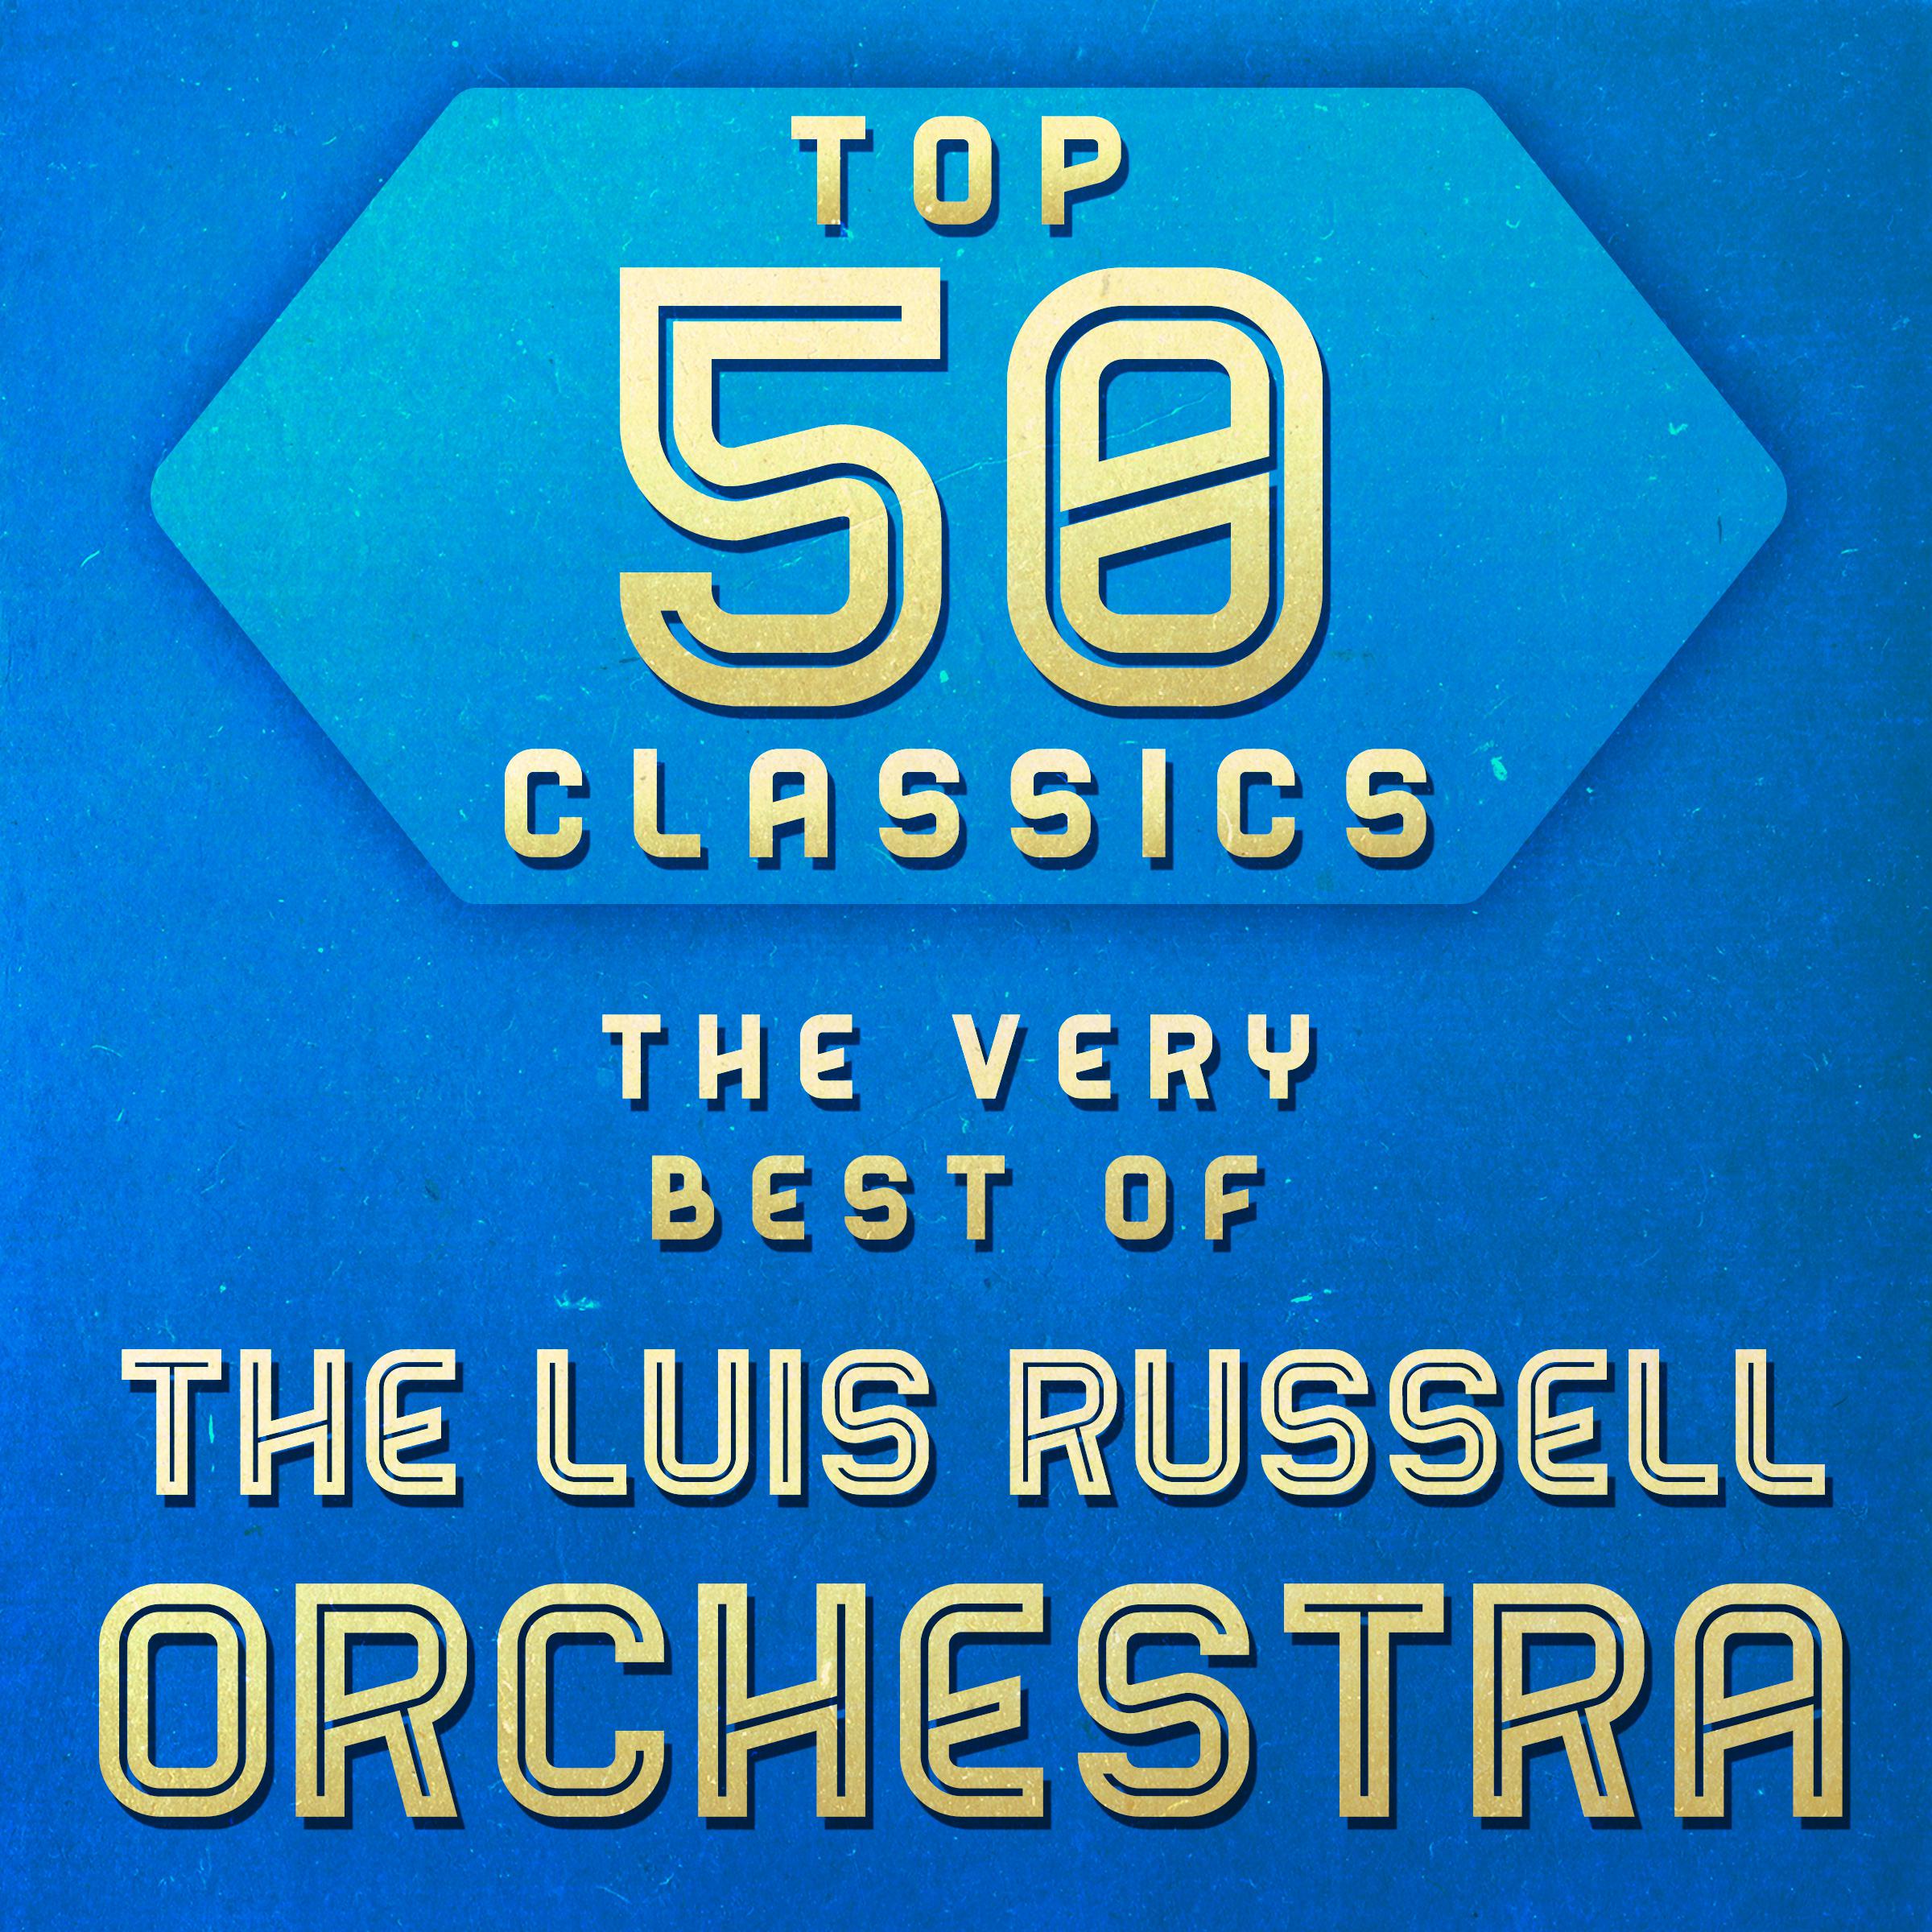 Luis Russell Orchestra - Primitive